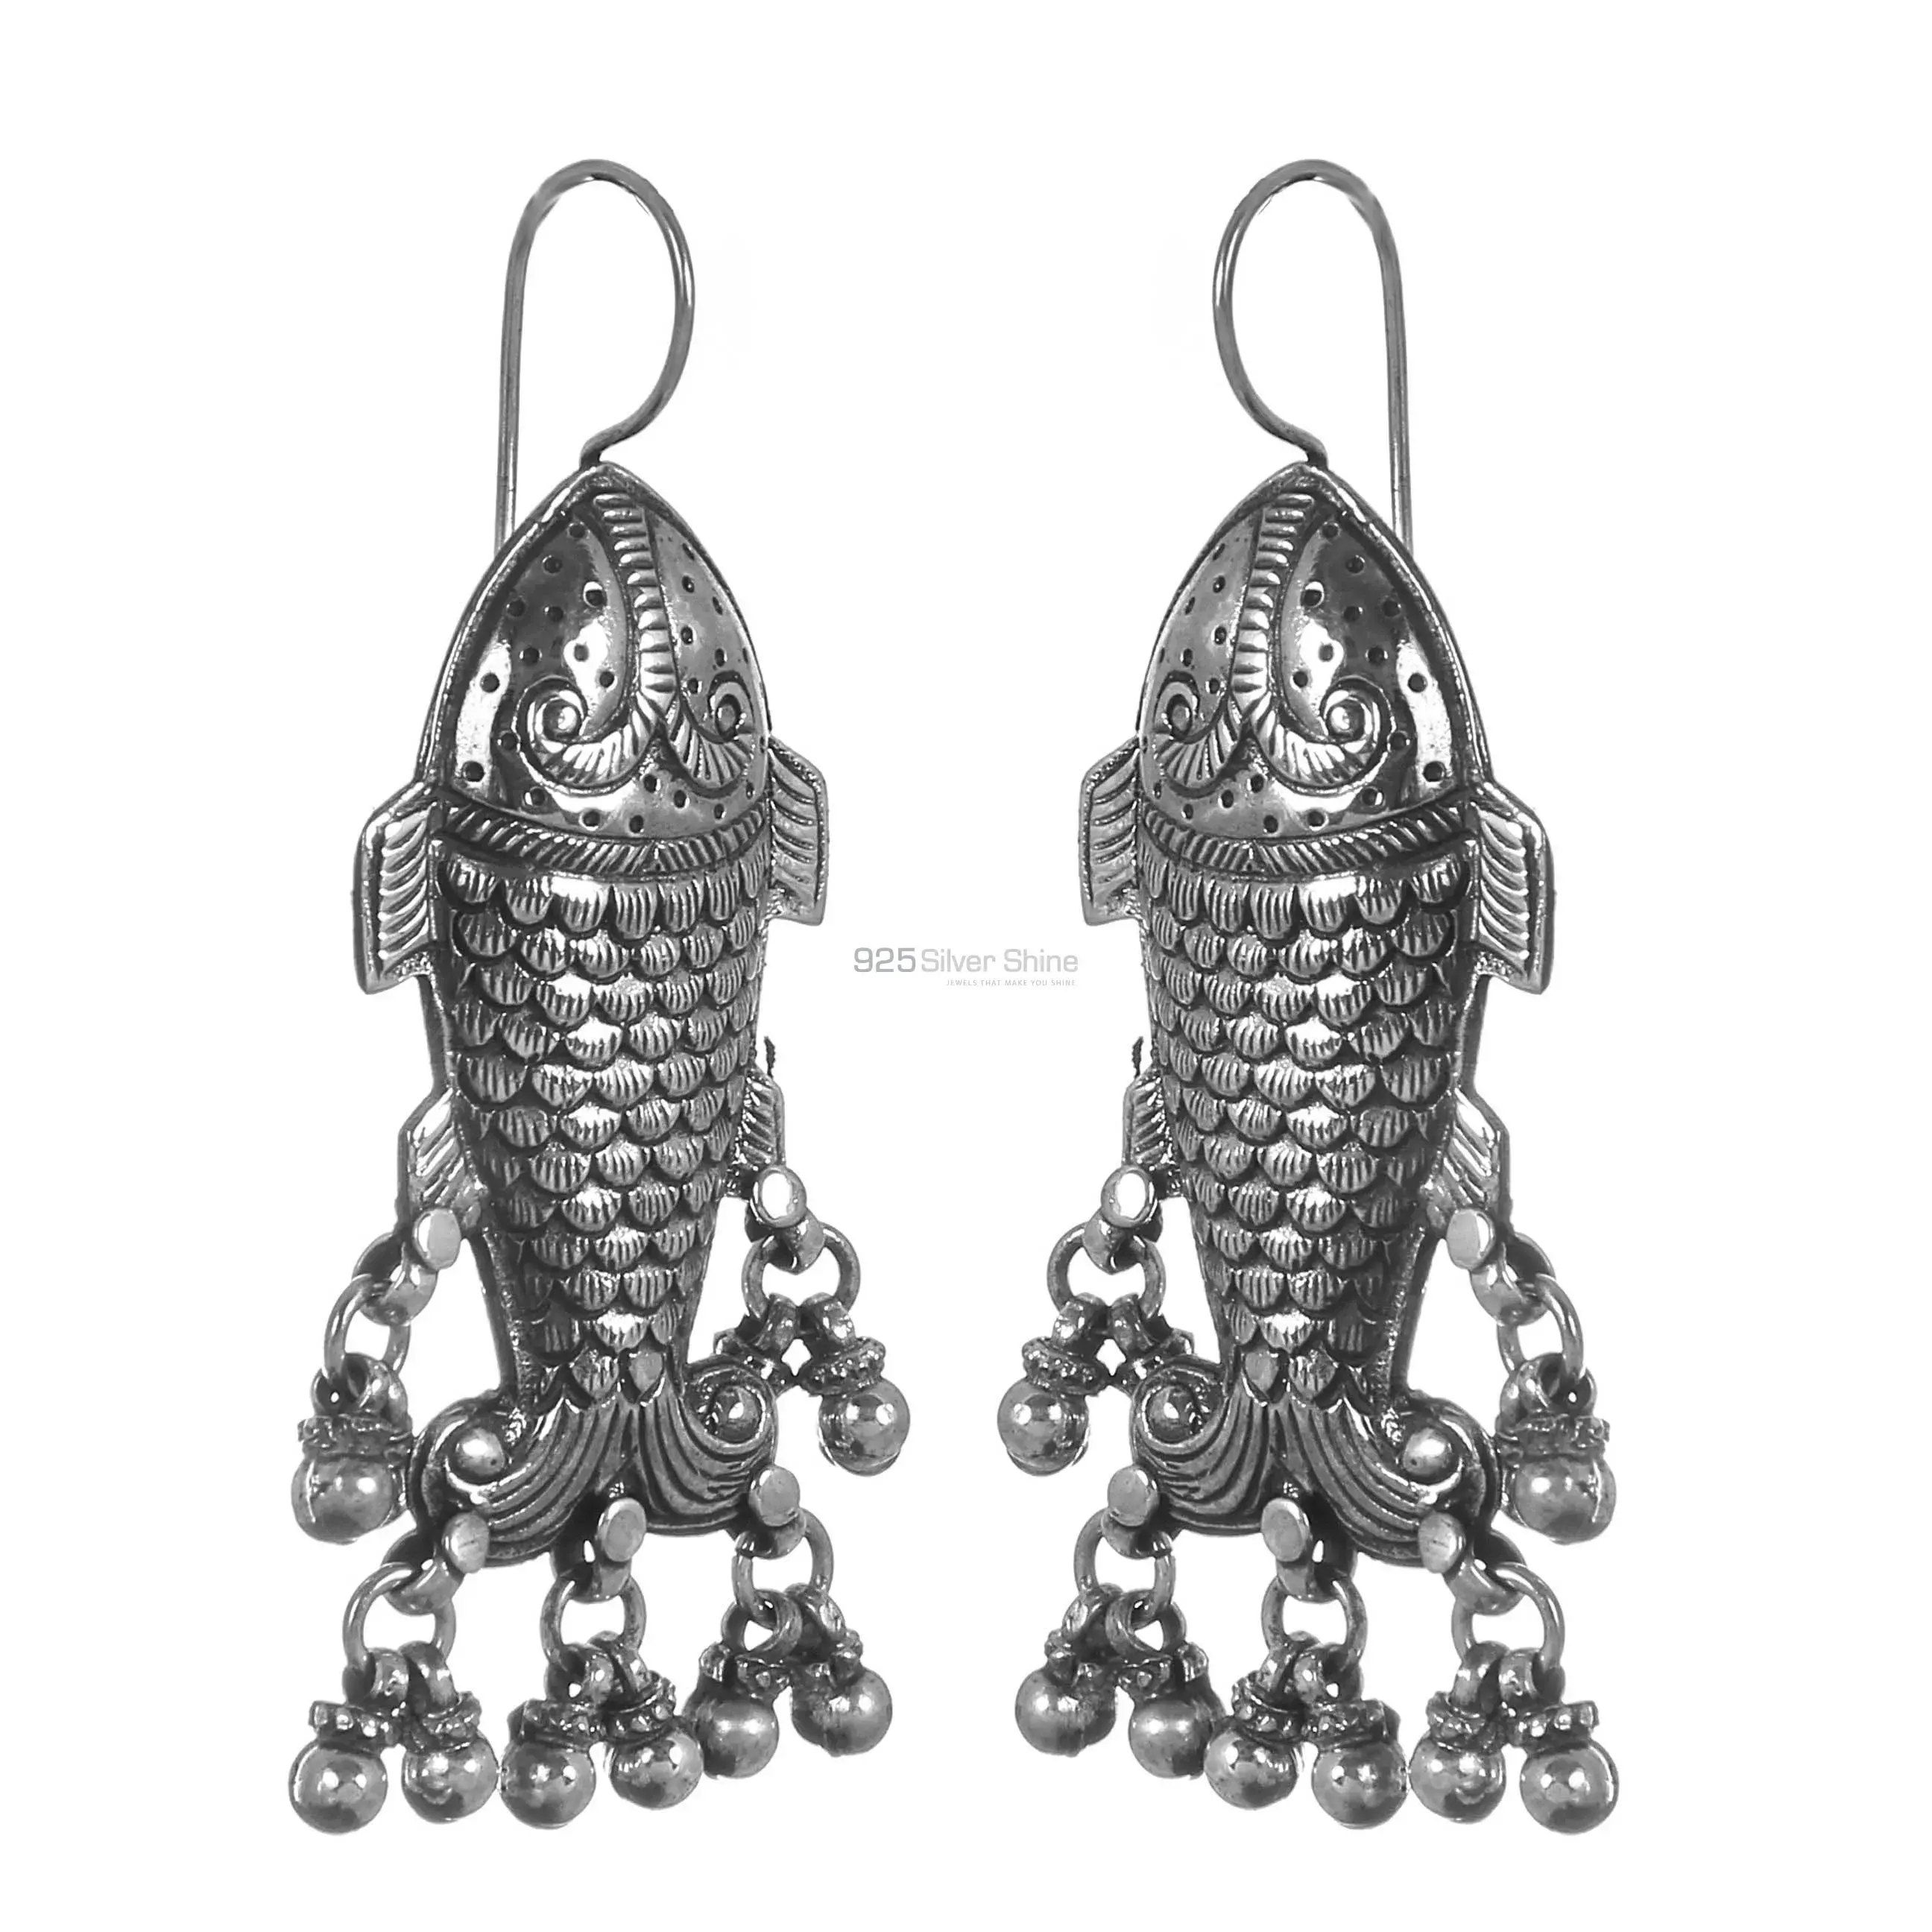 Wholesale Fish Design Earrings In Solid 925 Silver 925SE312_0